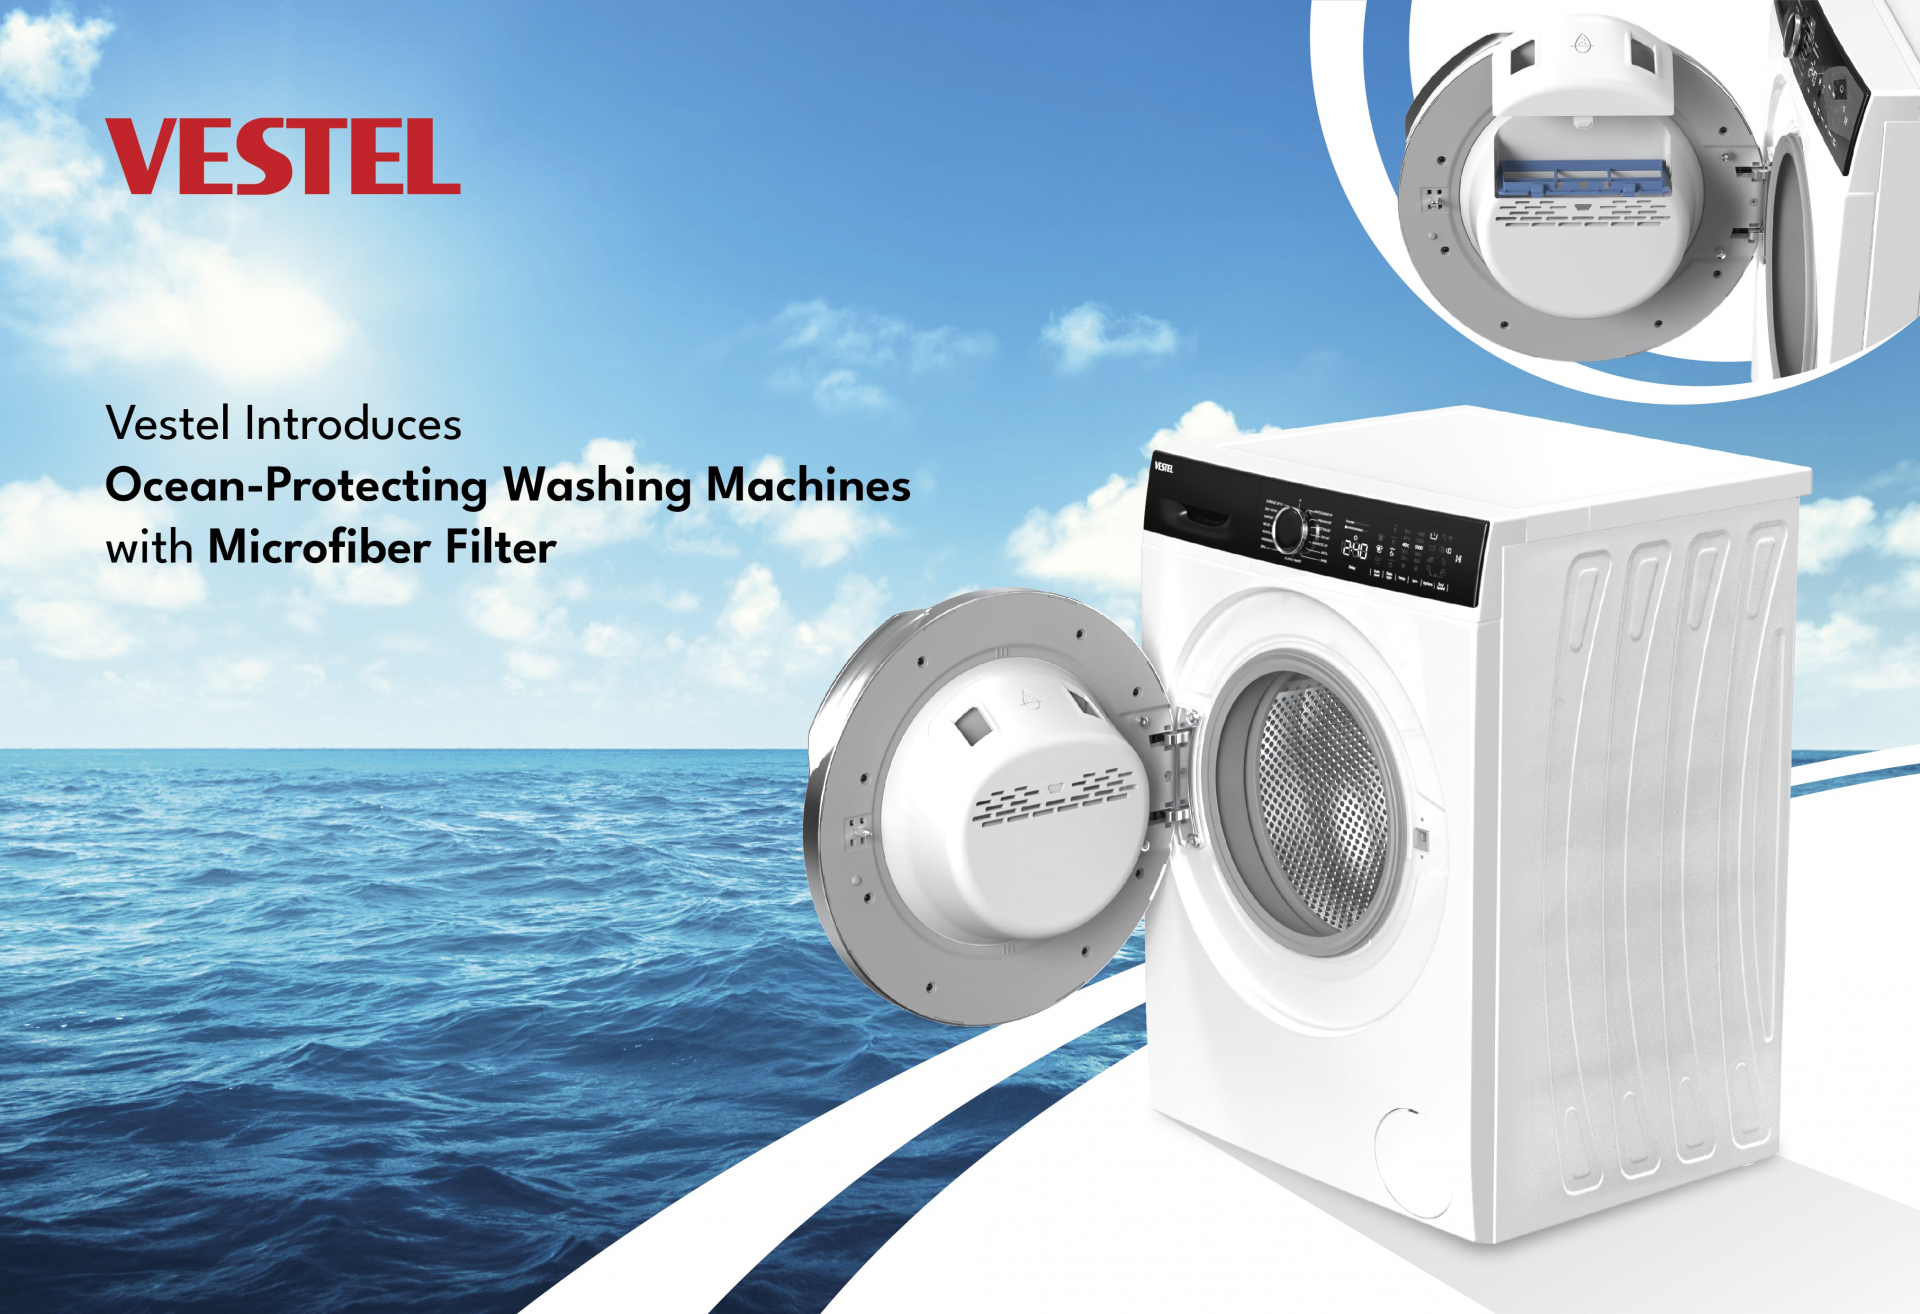 Vestel Launches Washing Machines with Microfiber Filter Technology for Protecting Oceans